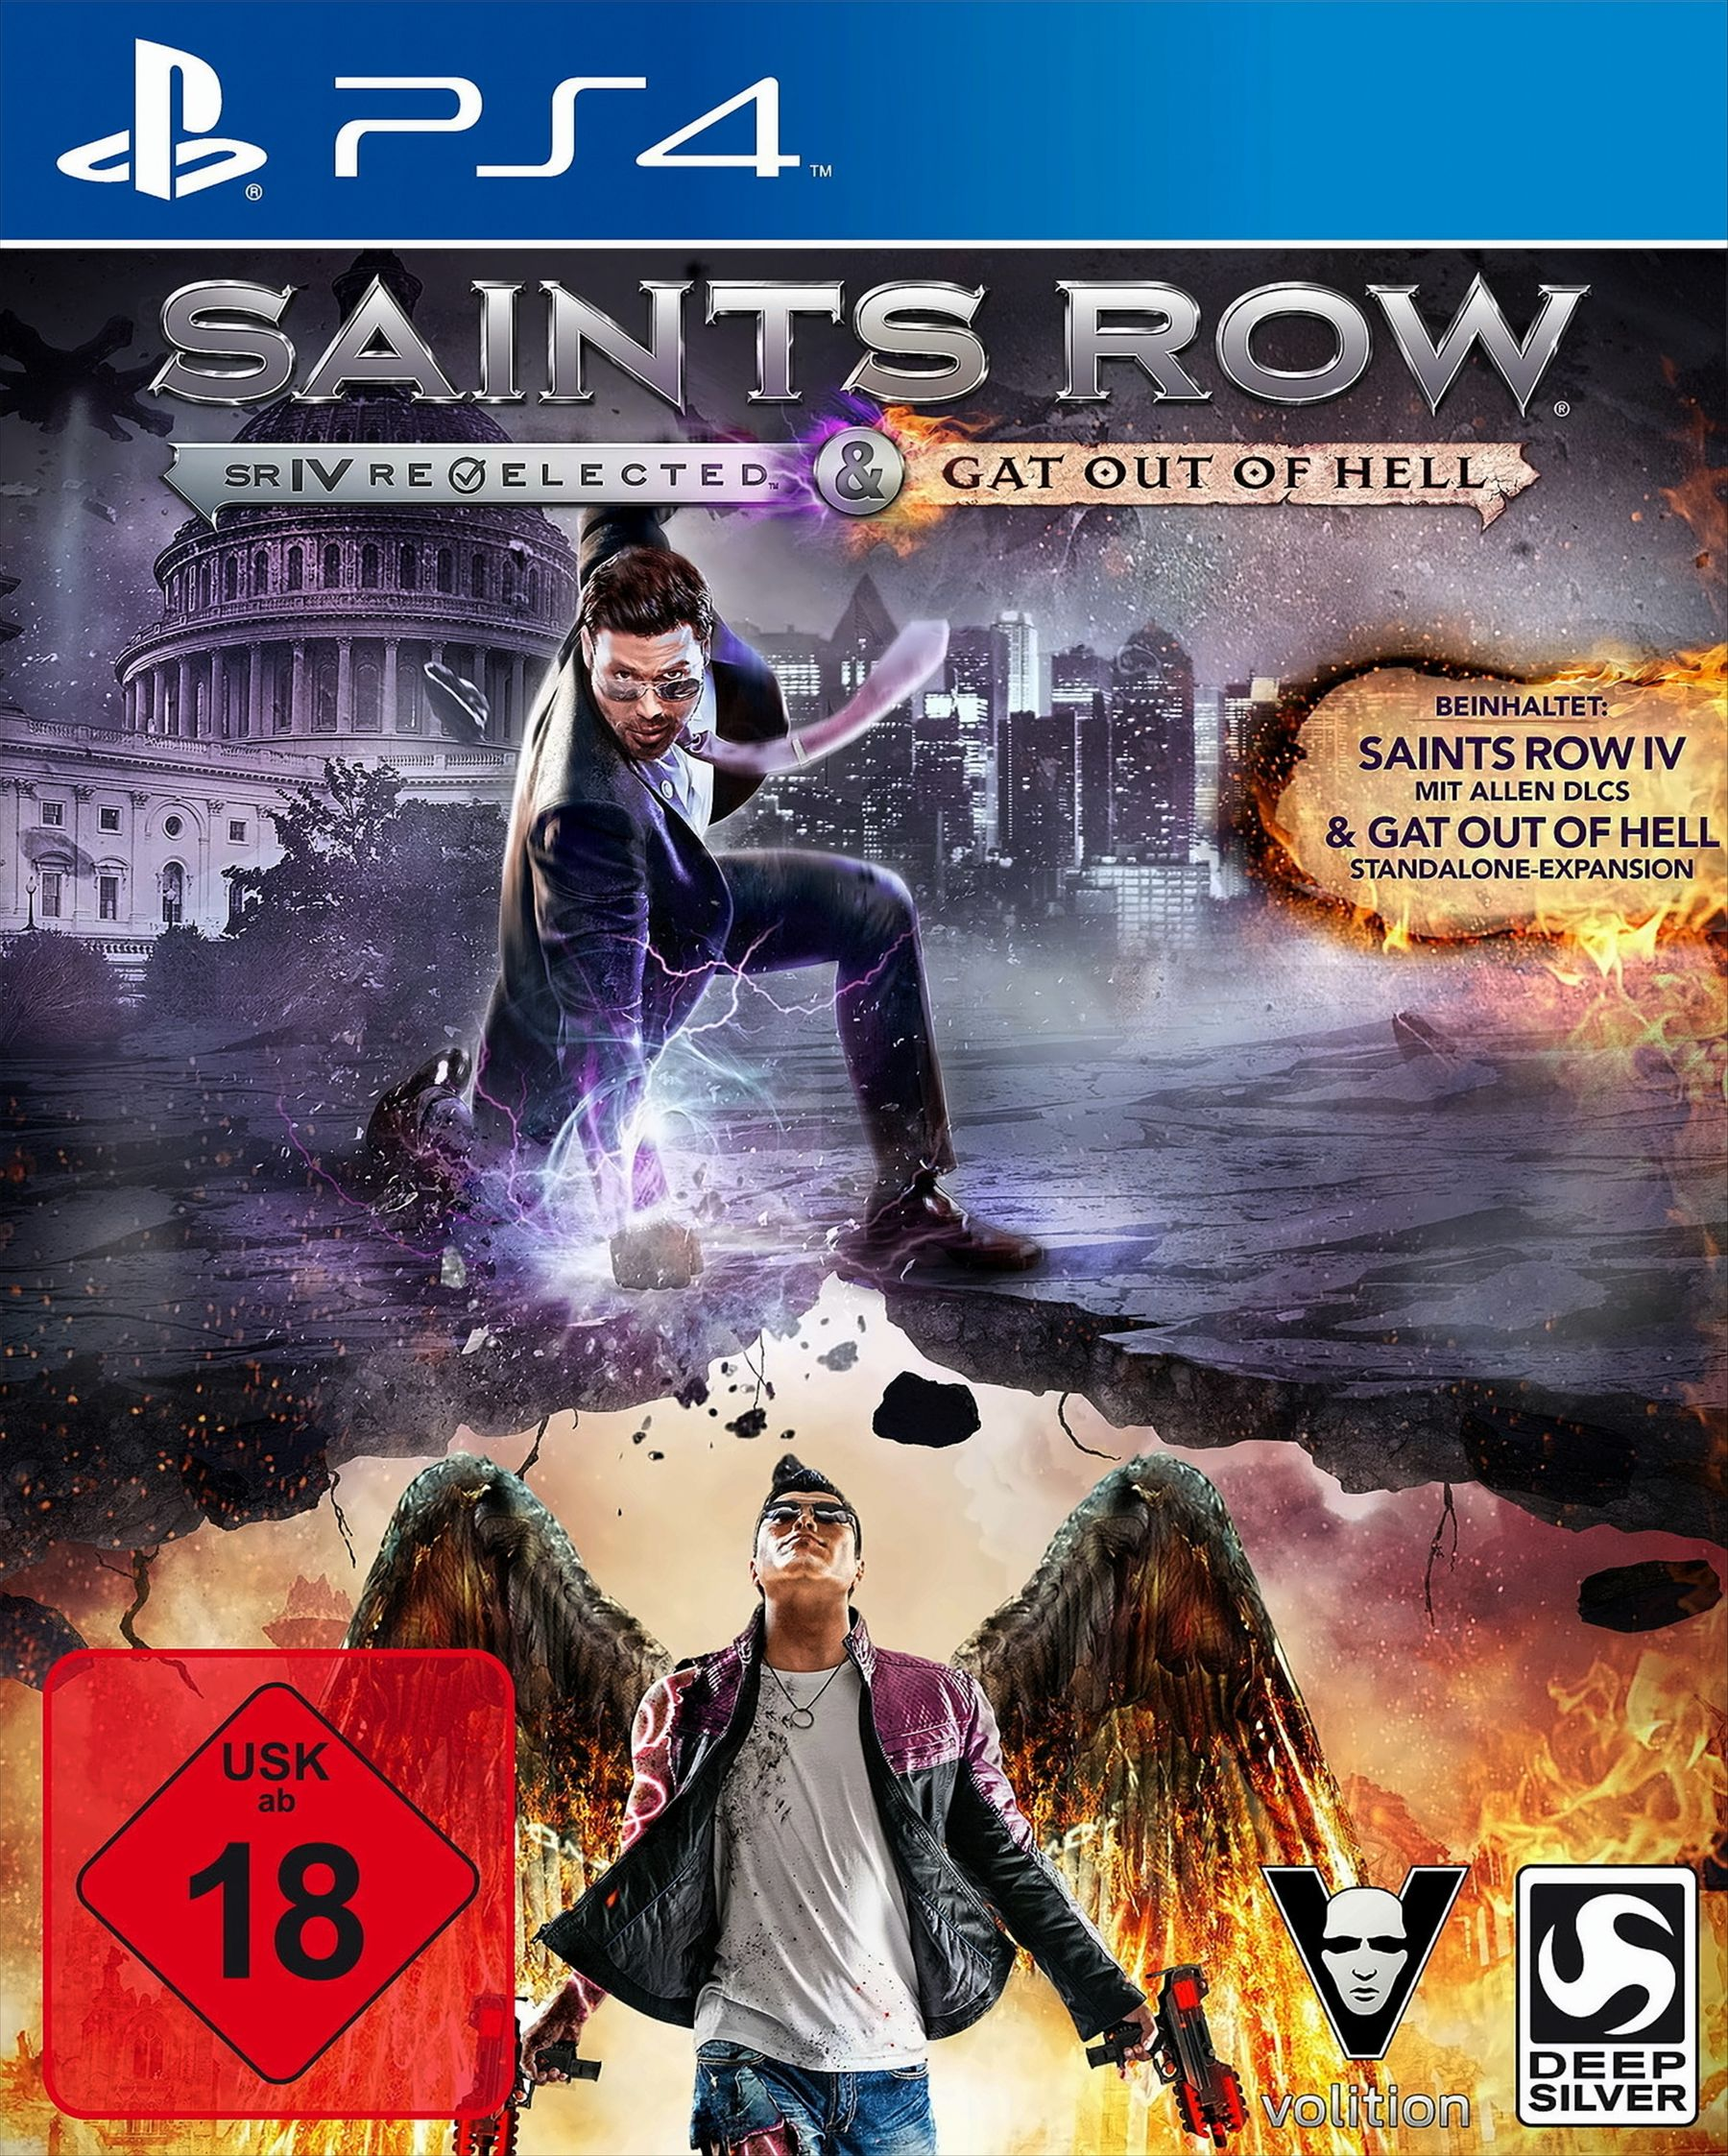 Saints Row IV: Re-Elected 4] [PlayStation 